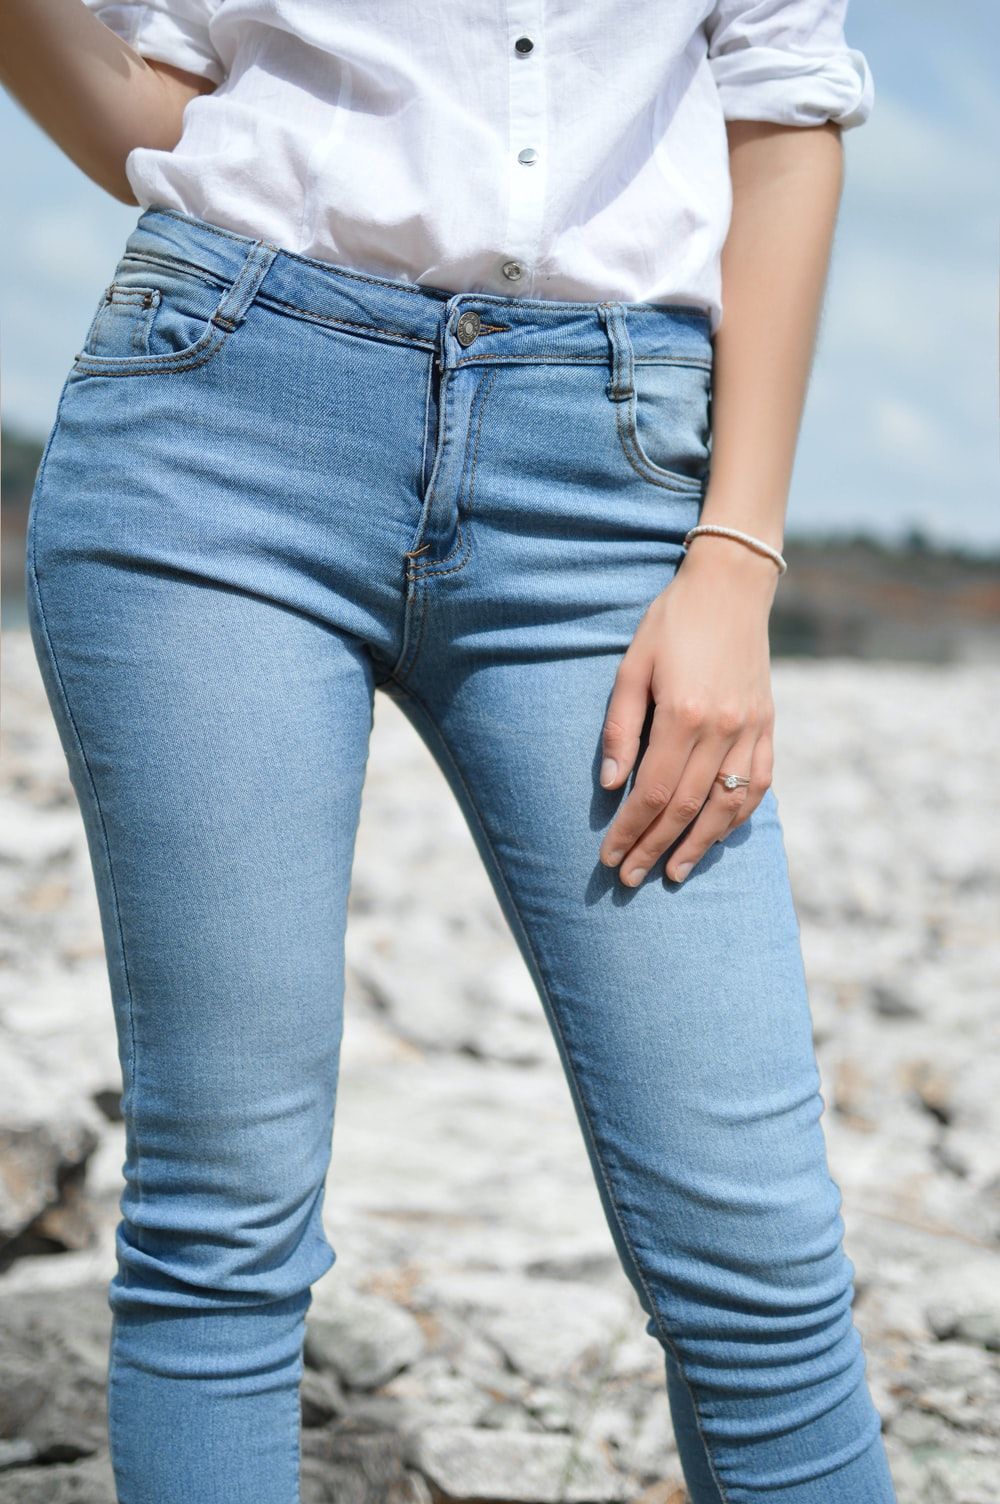 Skinny Jeans Picture. Download Free Image